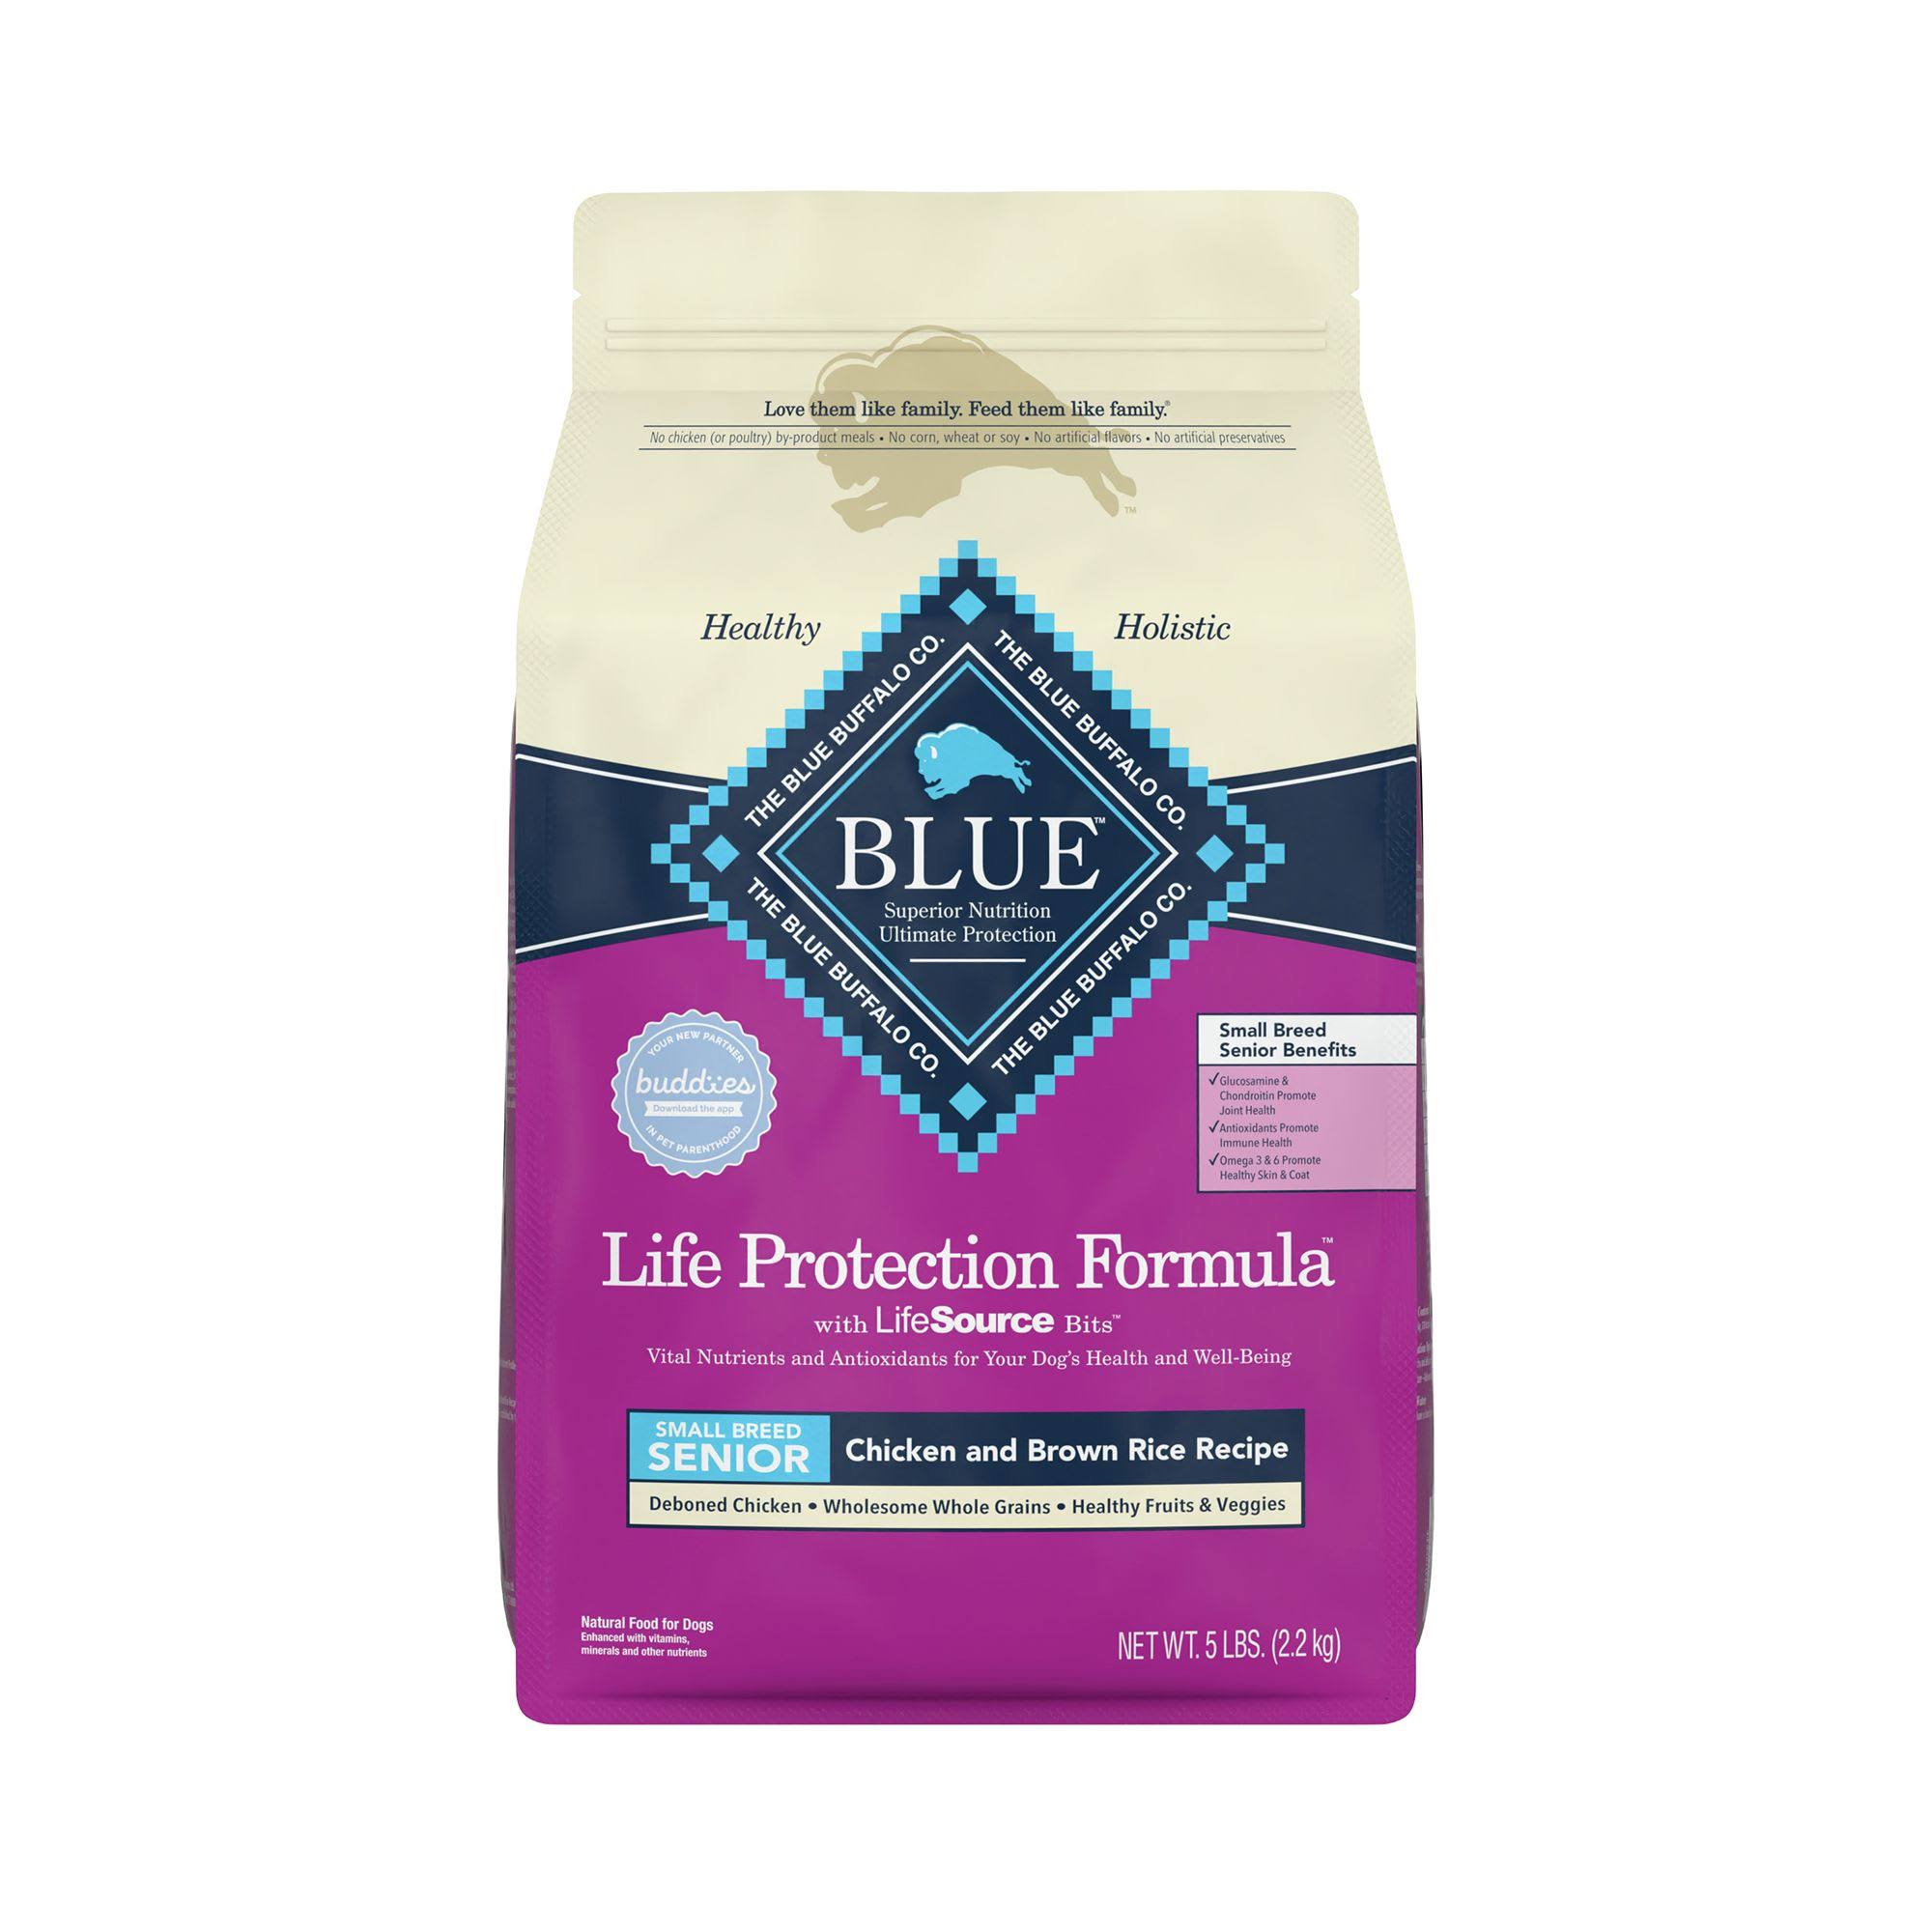 Blue Buffalo Blue Life Protection Formula with LifeSource Bits Dog Food, Chicken & Brown Rice Recipe, Small Breed Senior - 5 lbs (2.2 kg)